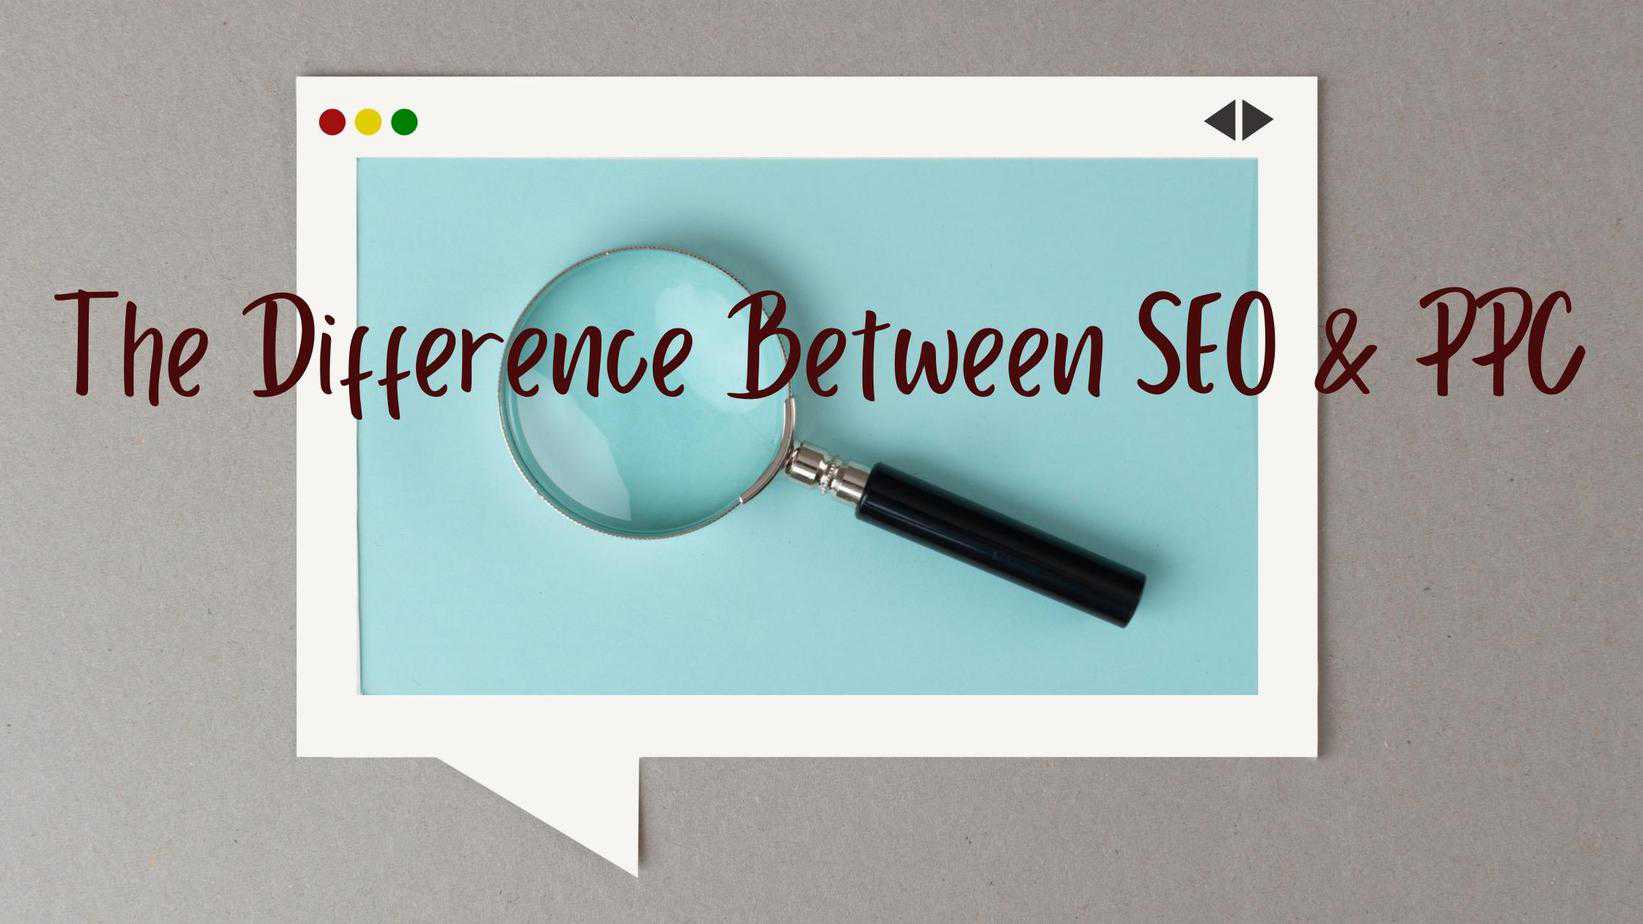 Featured image for “The Difference Between SEO & PPC”